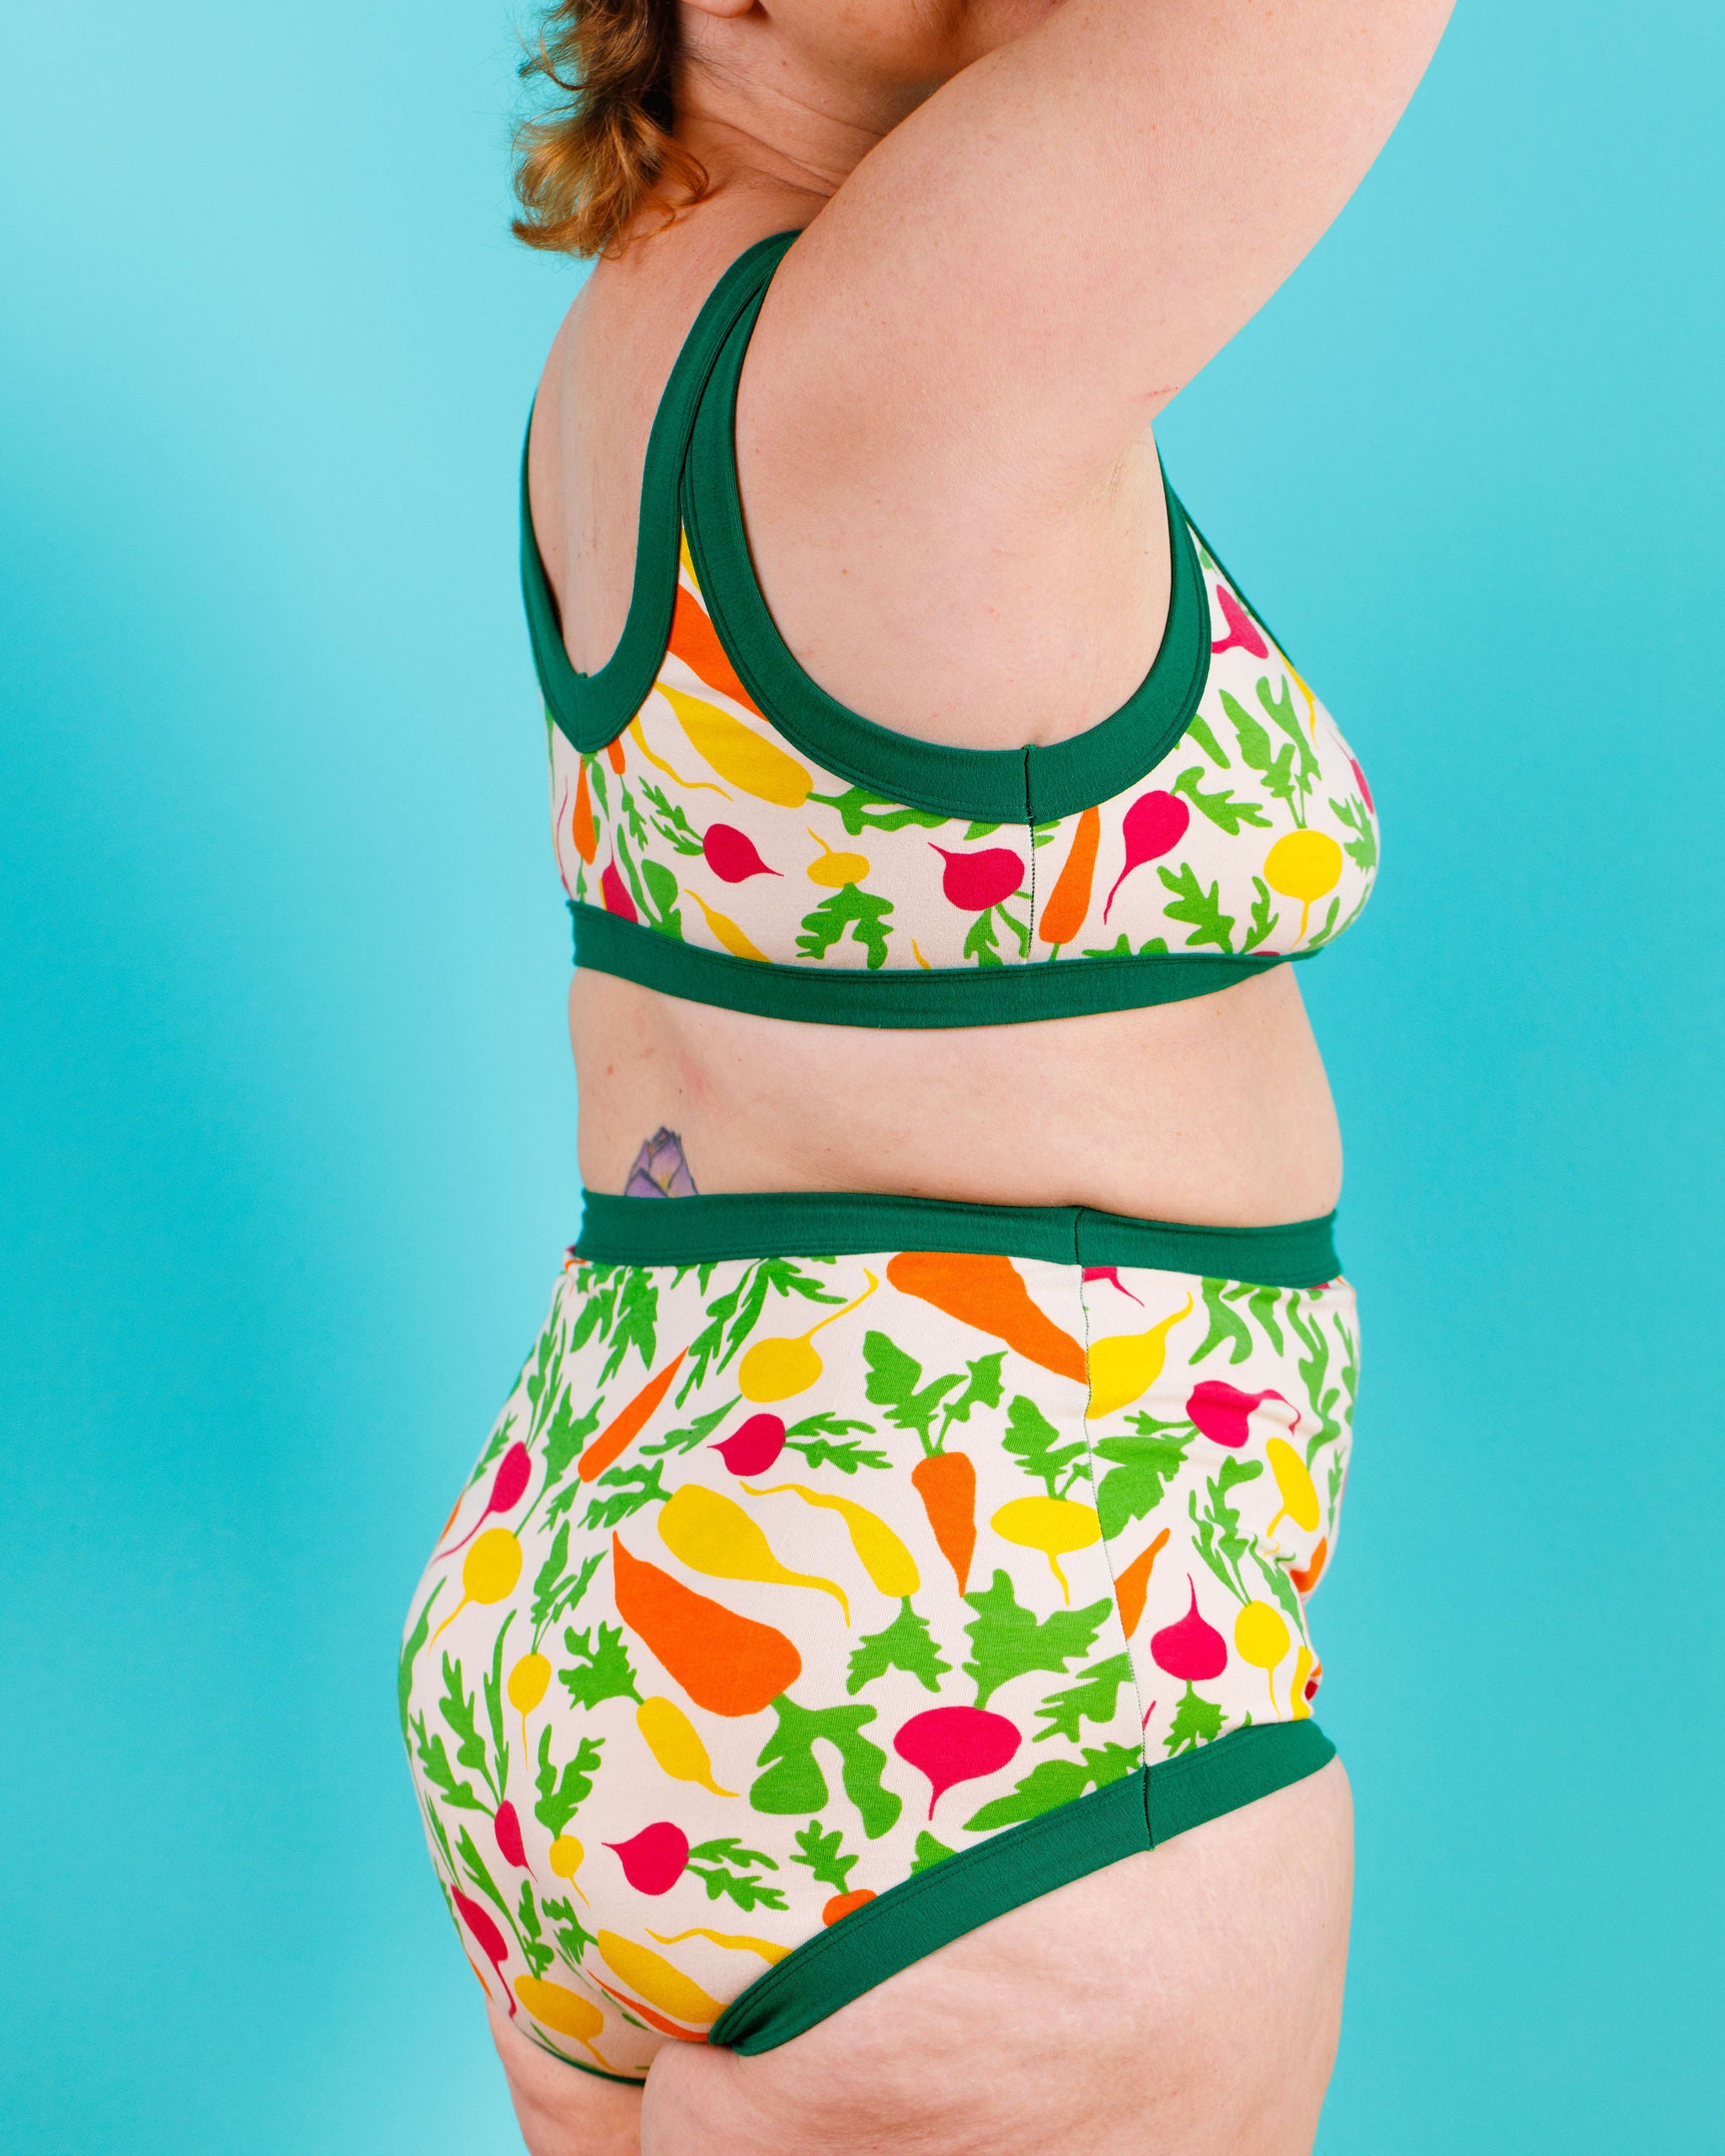 Model wearing Thunderants Sky Rise style underwear and matching Bralette in Root Veggies print - yellow, orange, pink, and green vegetables.